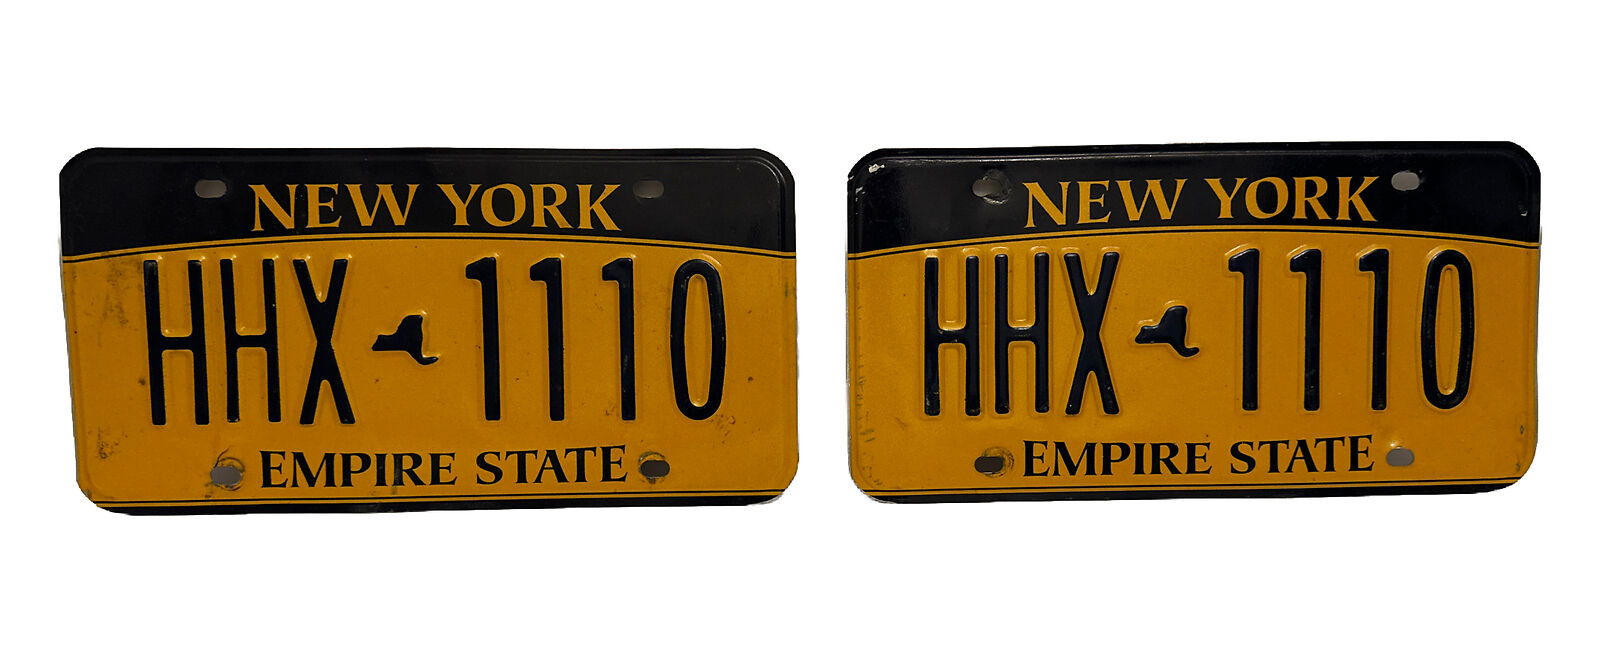 NEW YORK EMPIRE STATE  LICENSE PLATE PAIR - BLUE/GOLD - HHX 1110